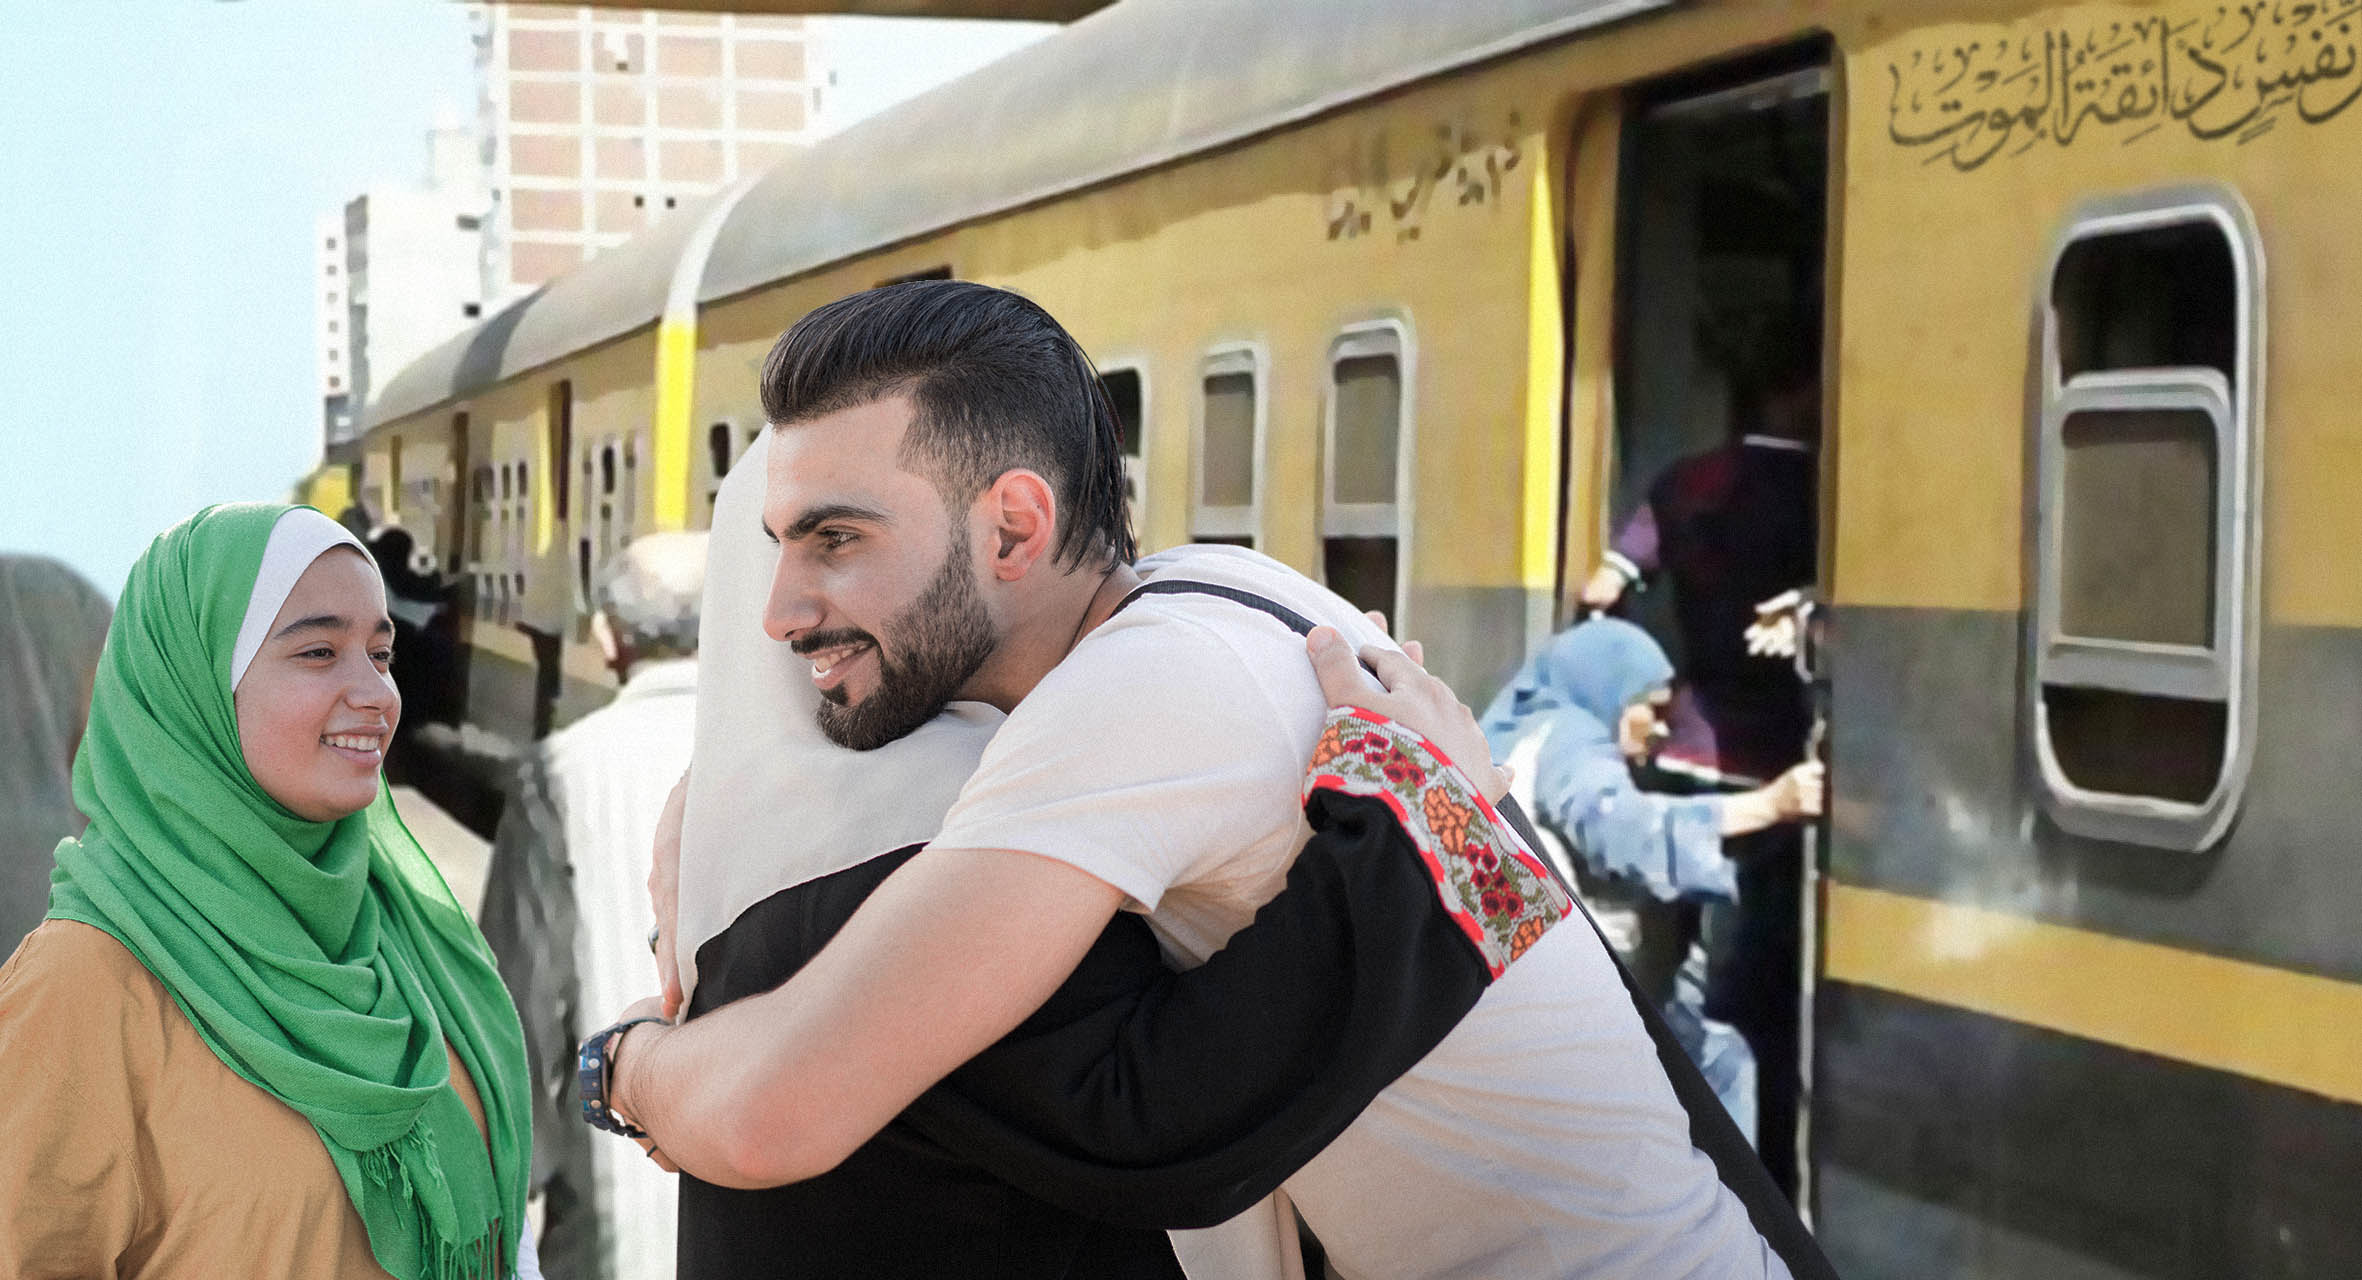 Egyptian authorities praise stronger family ties as loved ones gather to say final farewells at train stations image